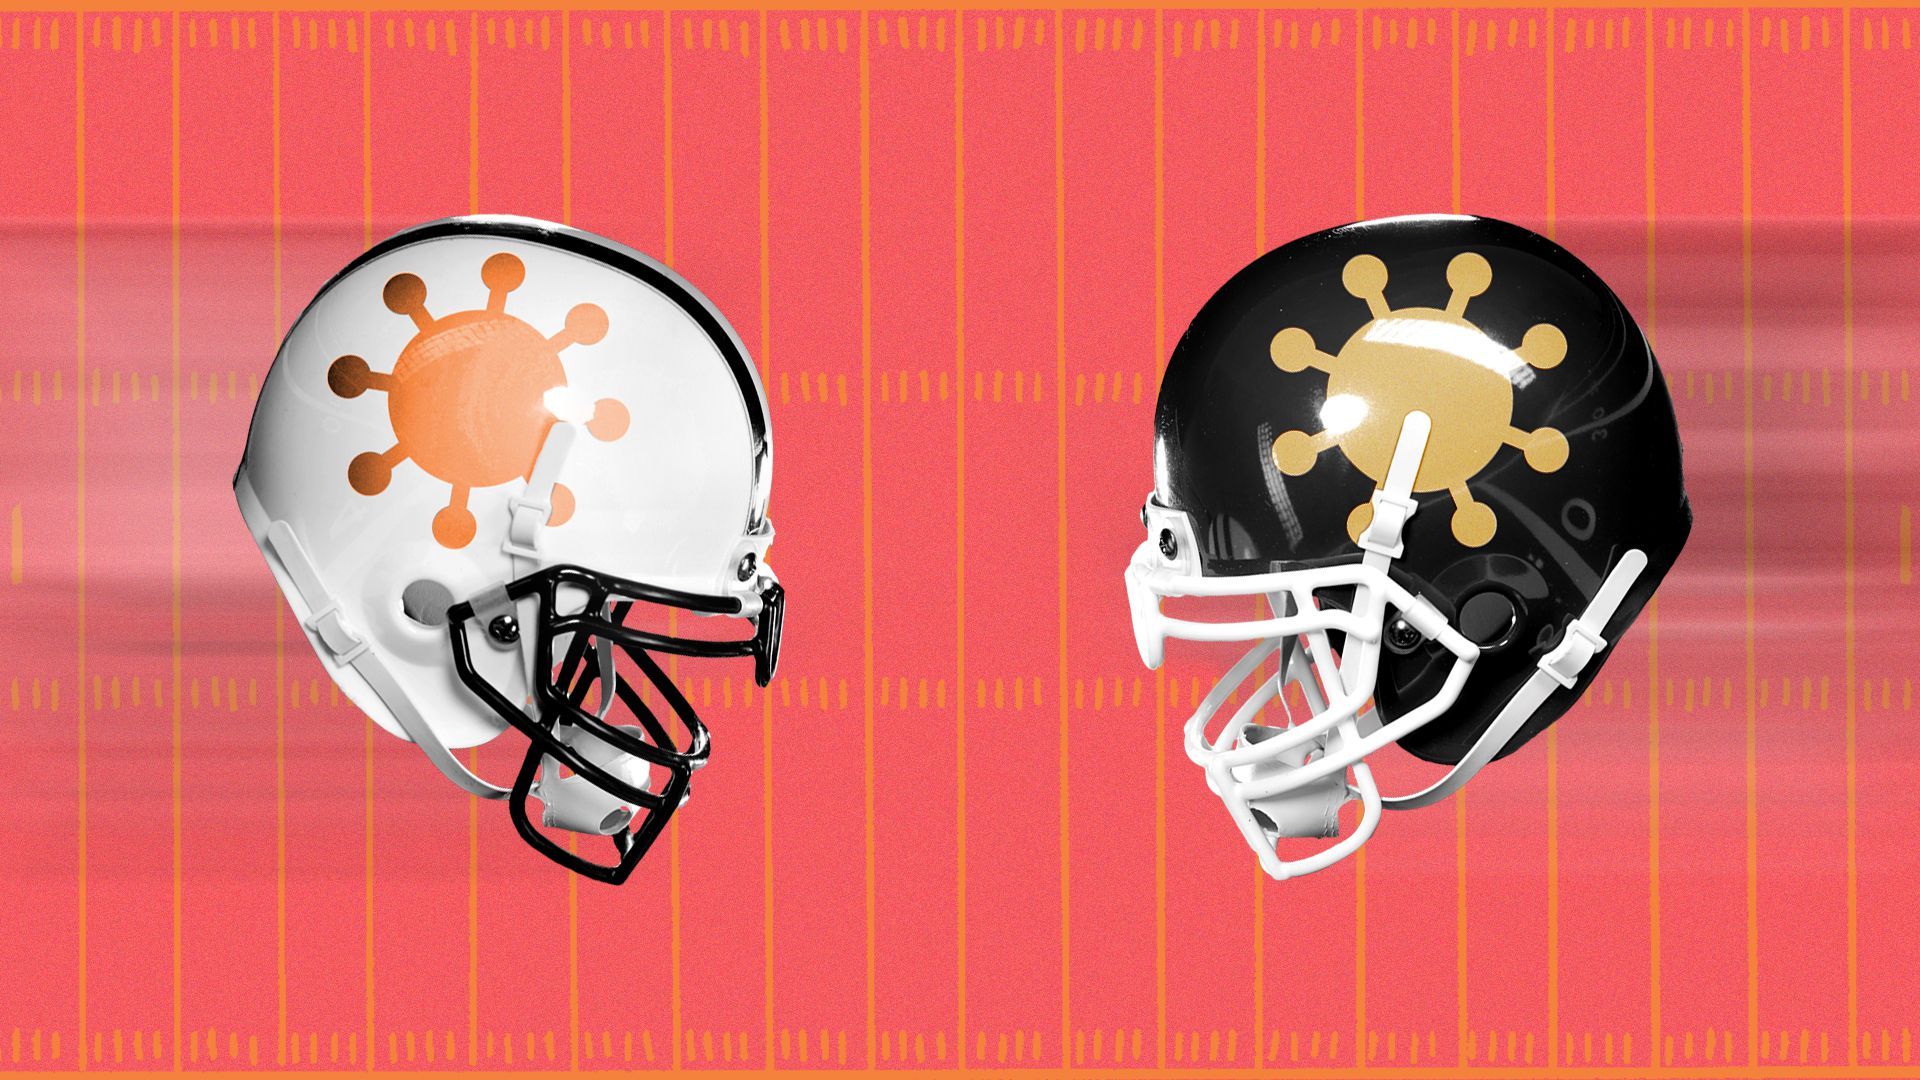 Illustration of two football helmets with coronavirus logos on them flying at each other